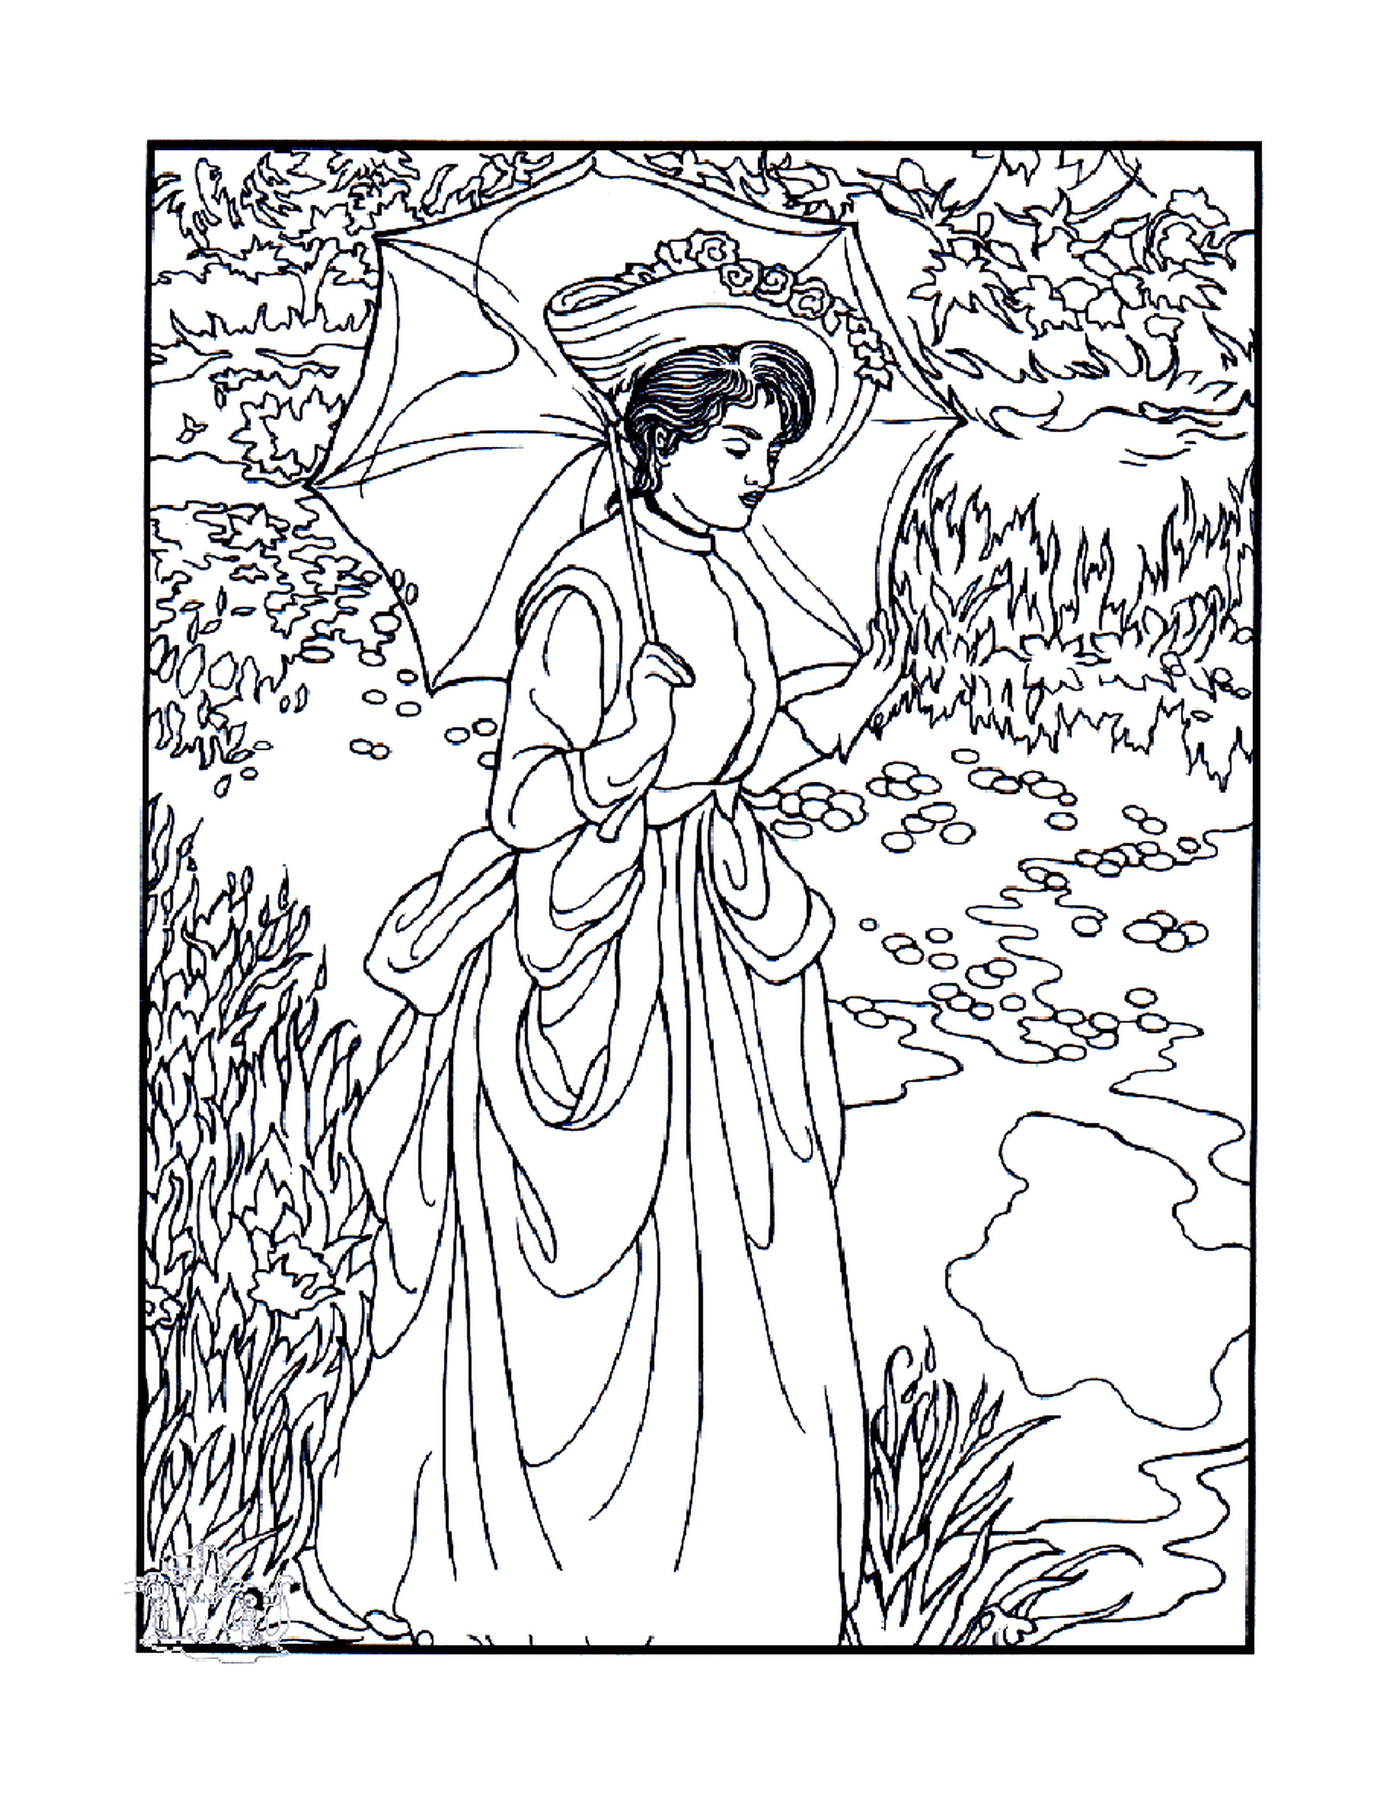  A woman with an umbrella in a field 